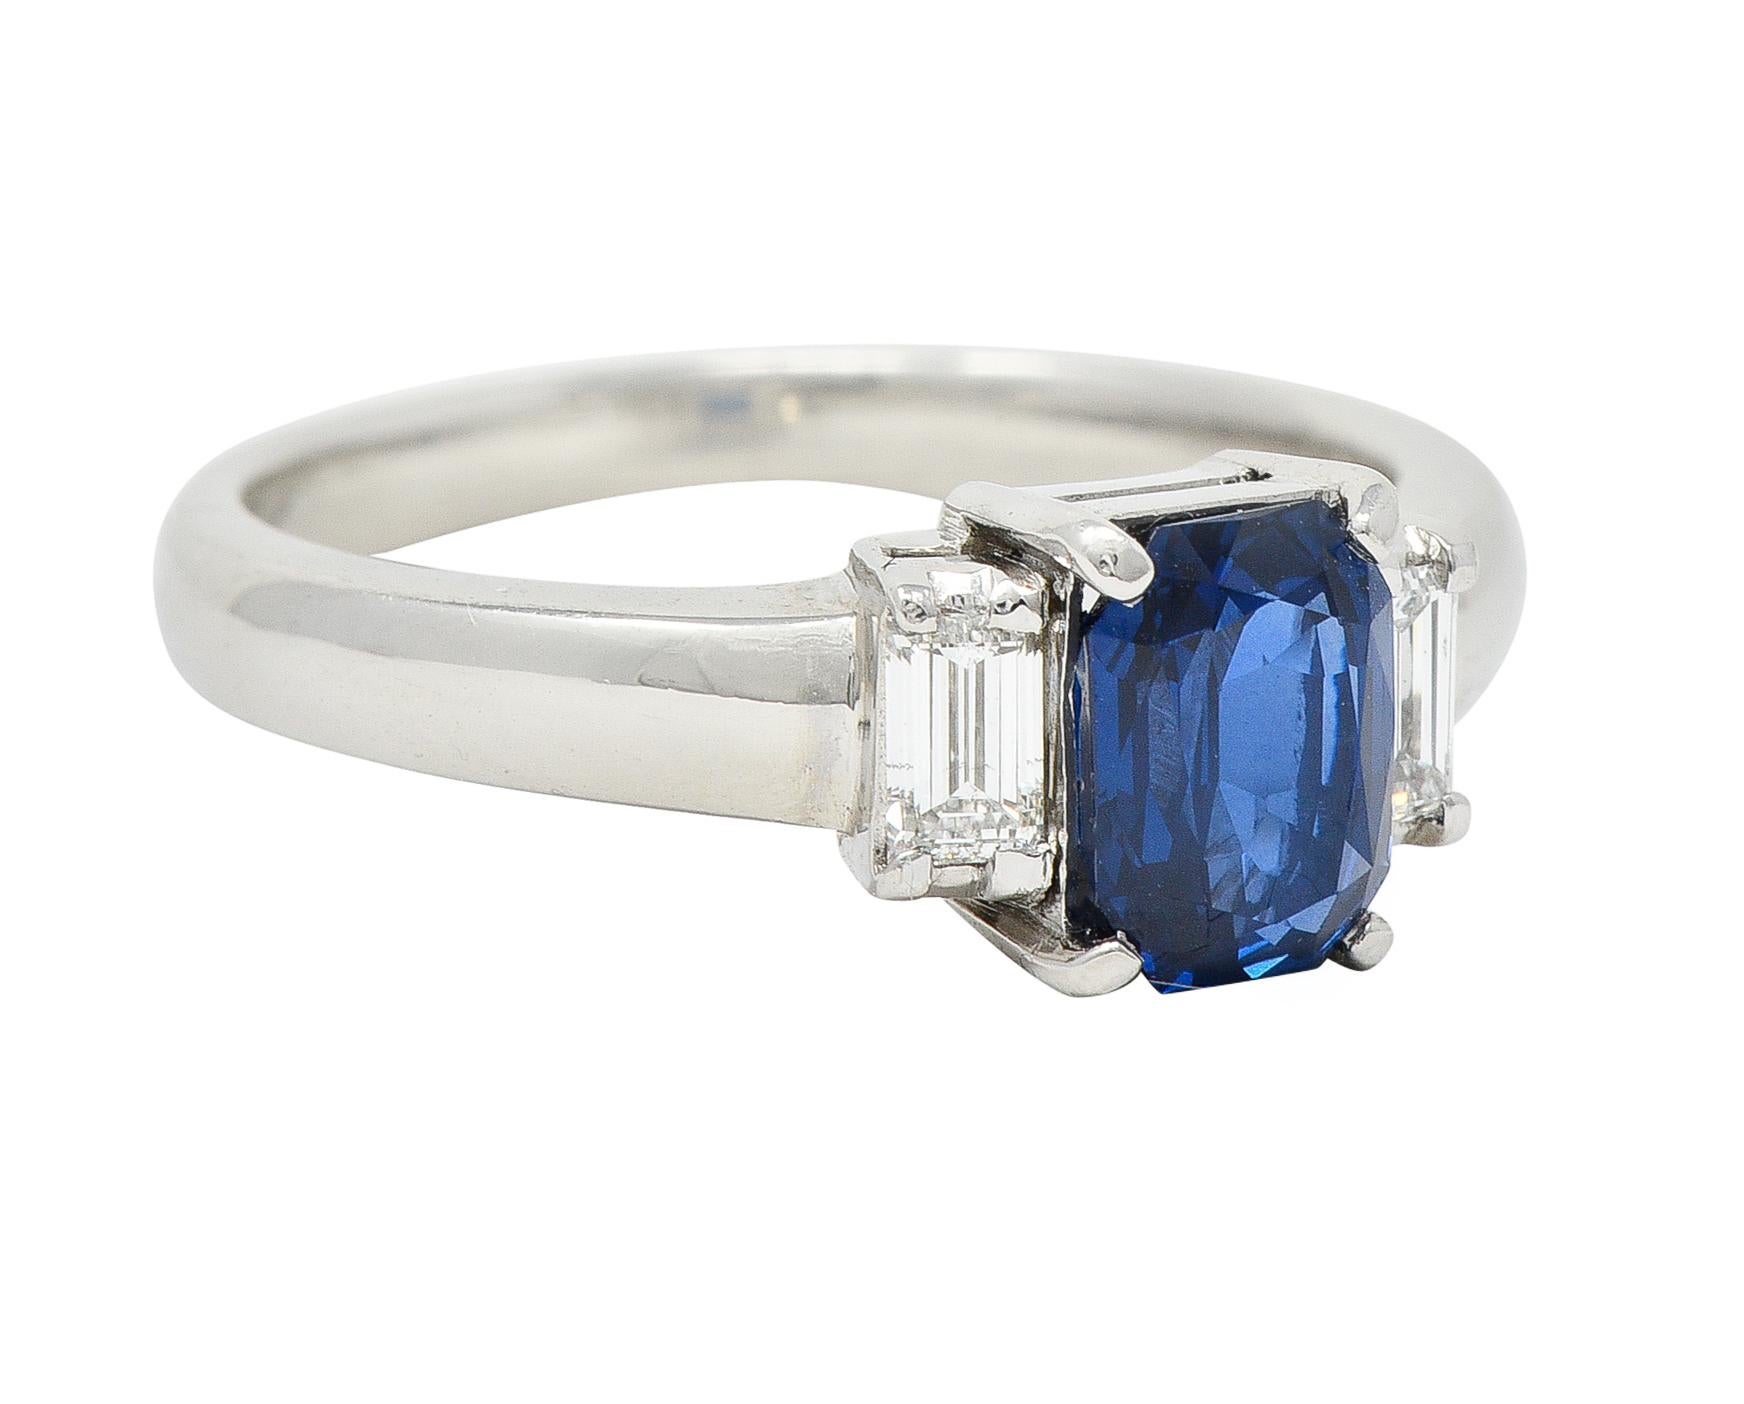 Centering a cushion cut sapphire weighing 1.78 carats total - transparent medium blue. Flanked by baguette cut diamonds - all prong set in baskets. Weighing 0.23 carat total - G/H color with VS clarity. With high polish finish. Inscribed with carat